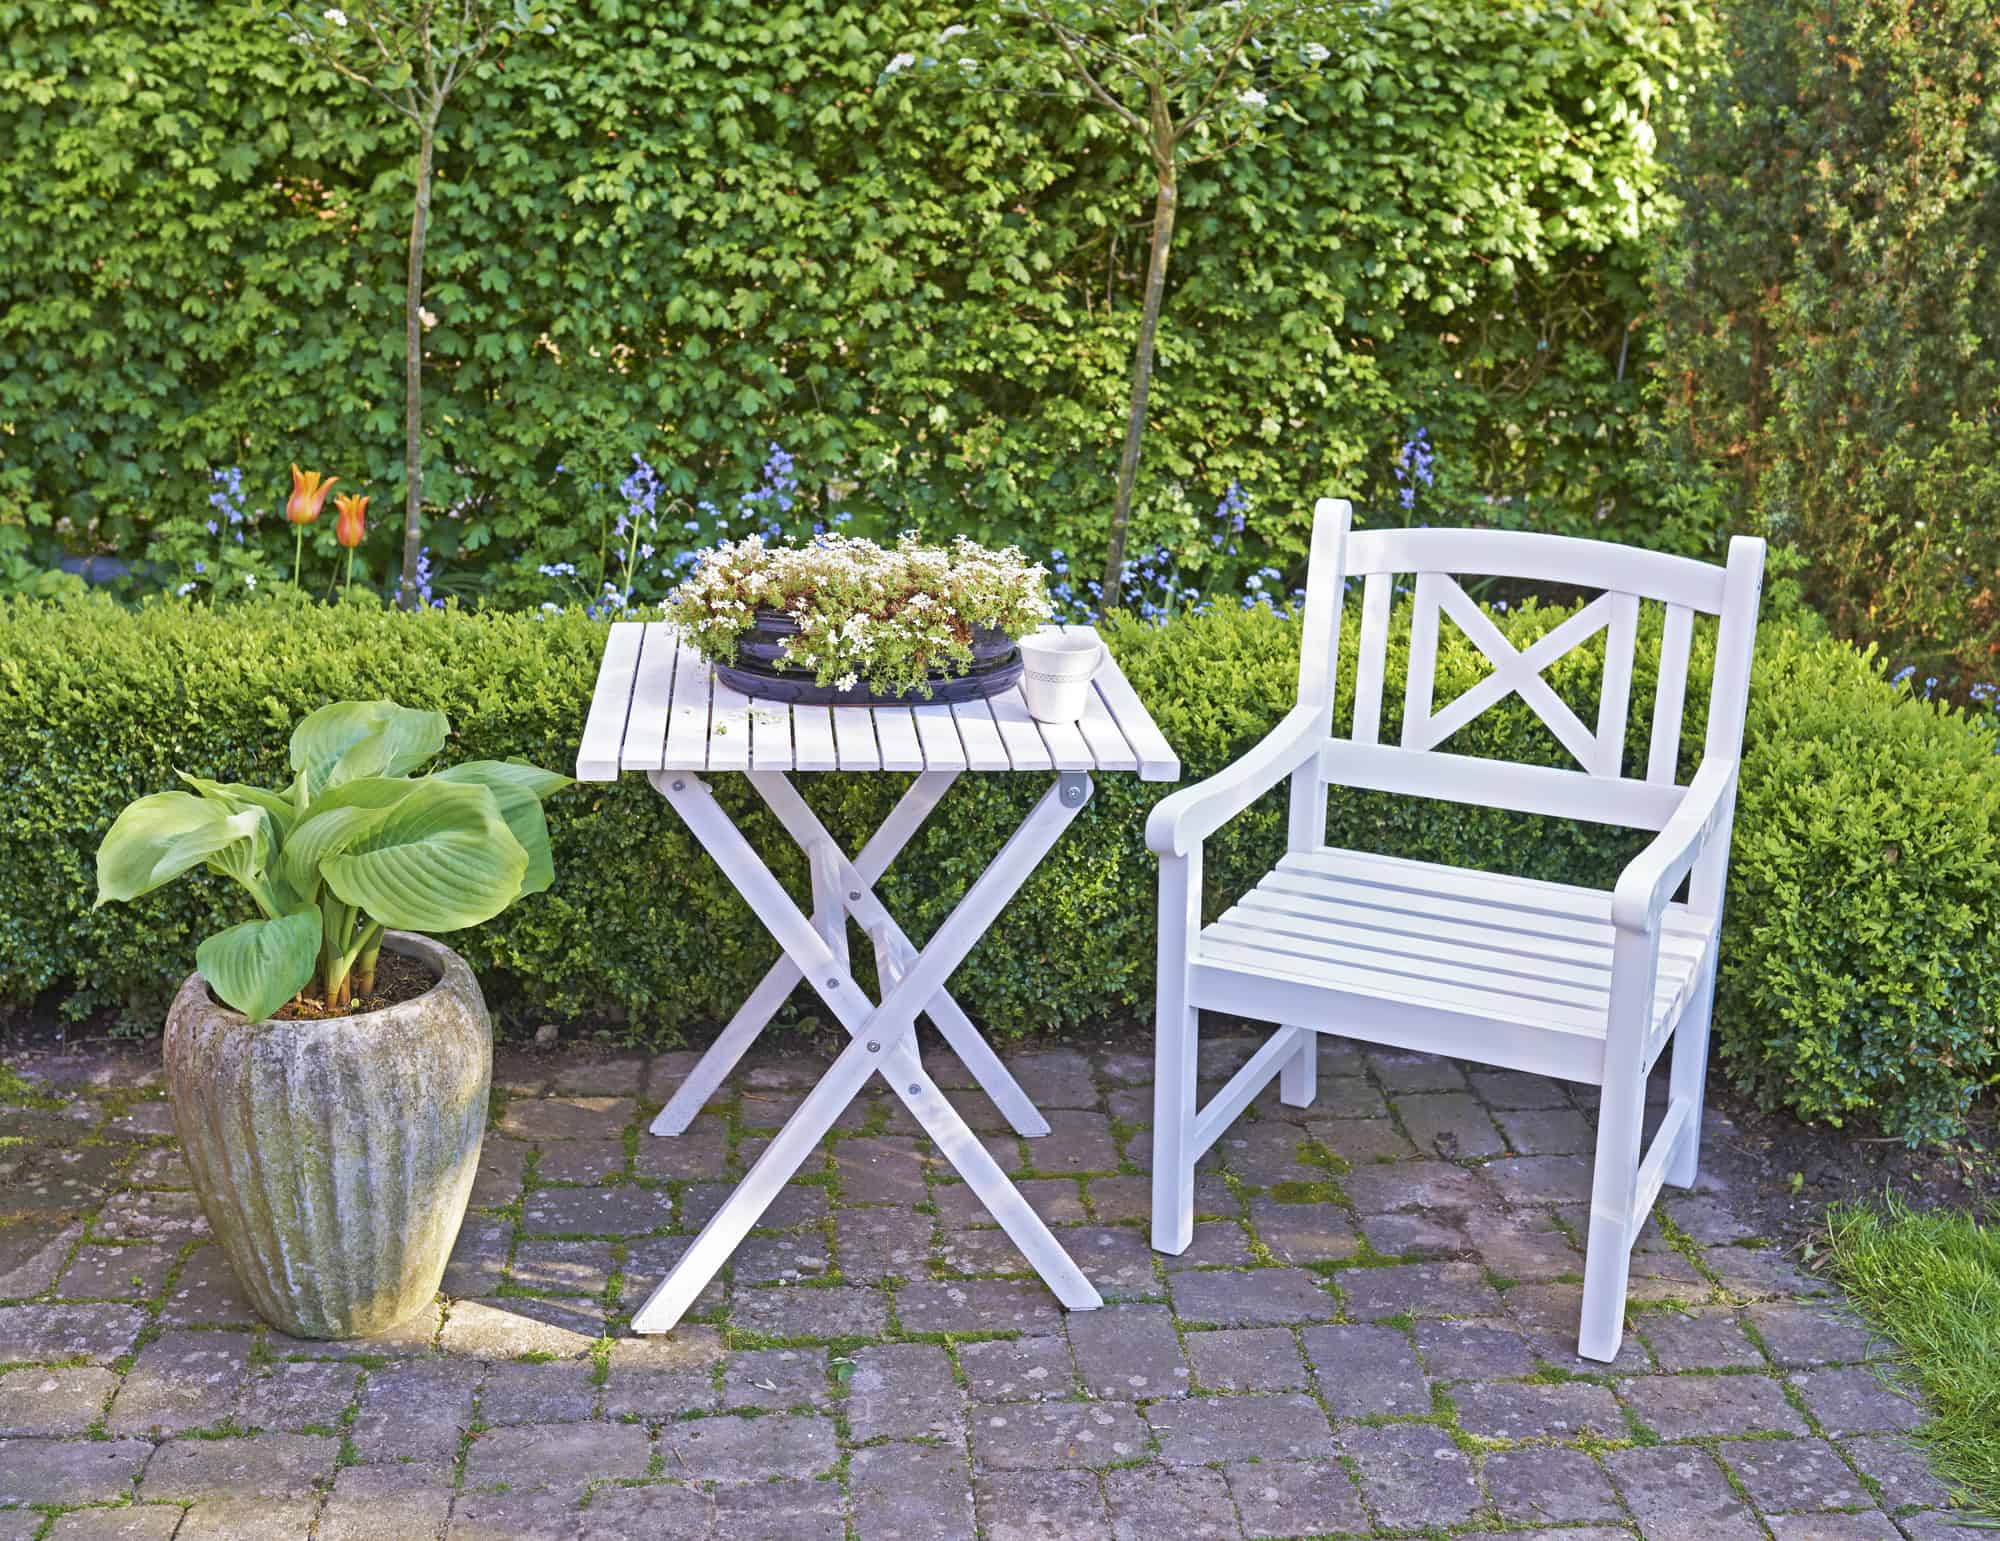 A white table and chair in a small courtyard surrounded by greenery on a wall.